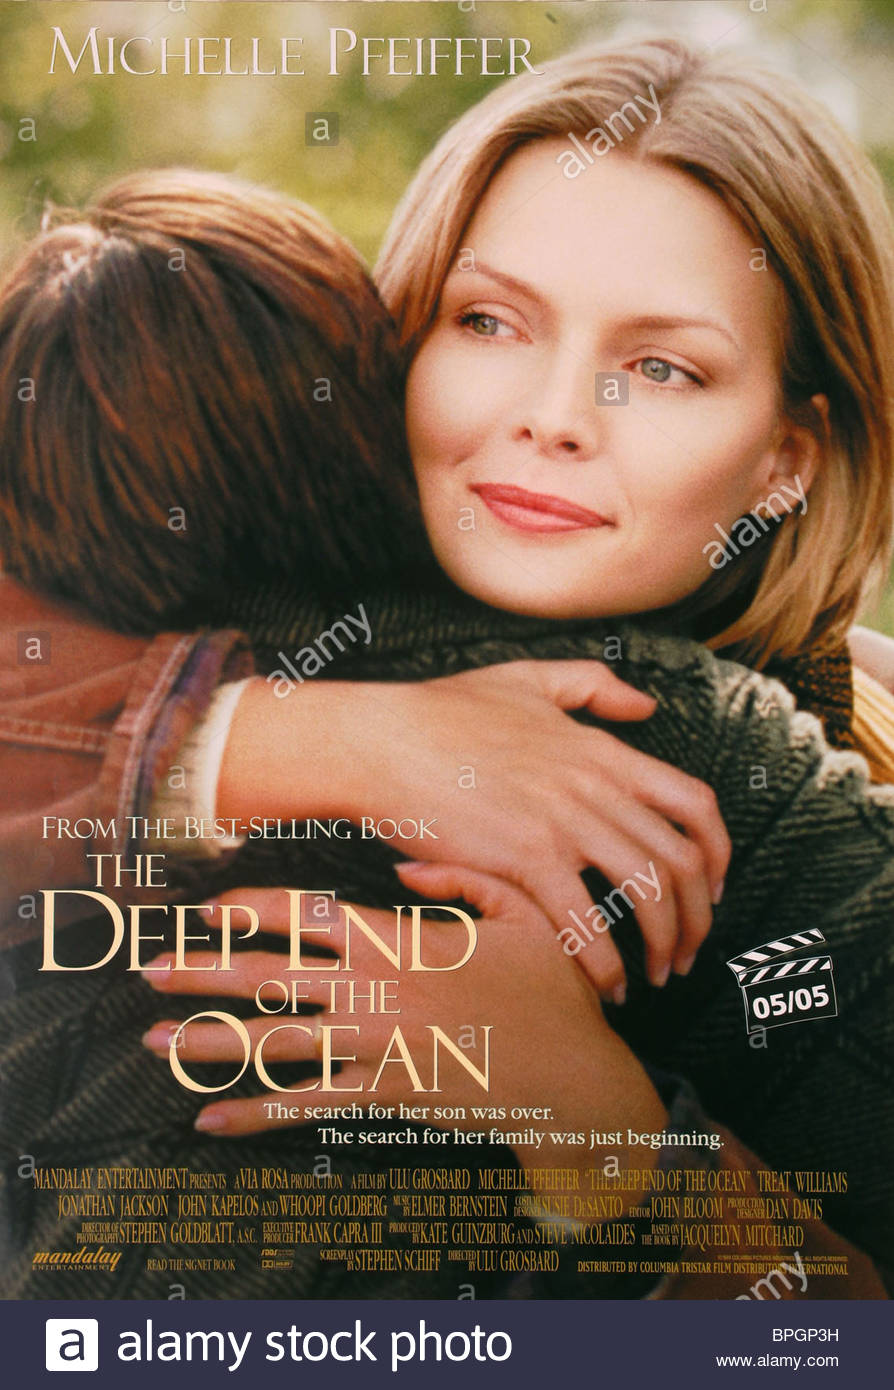 The Deep End Of The Ocean Main Poster